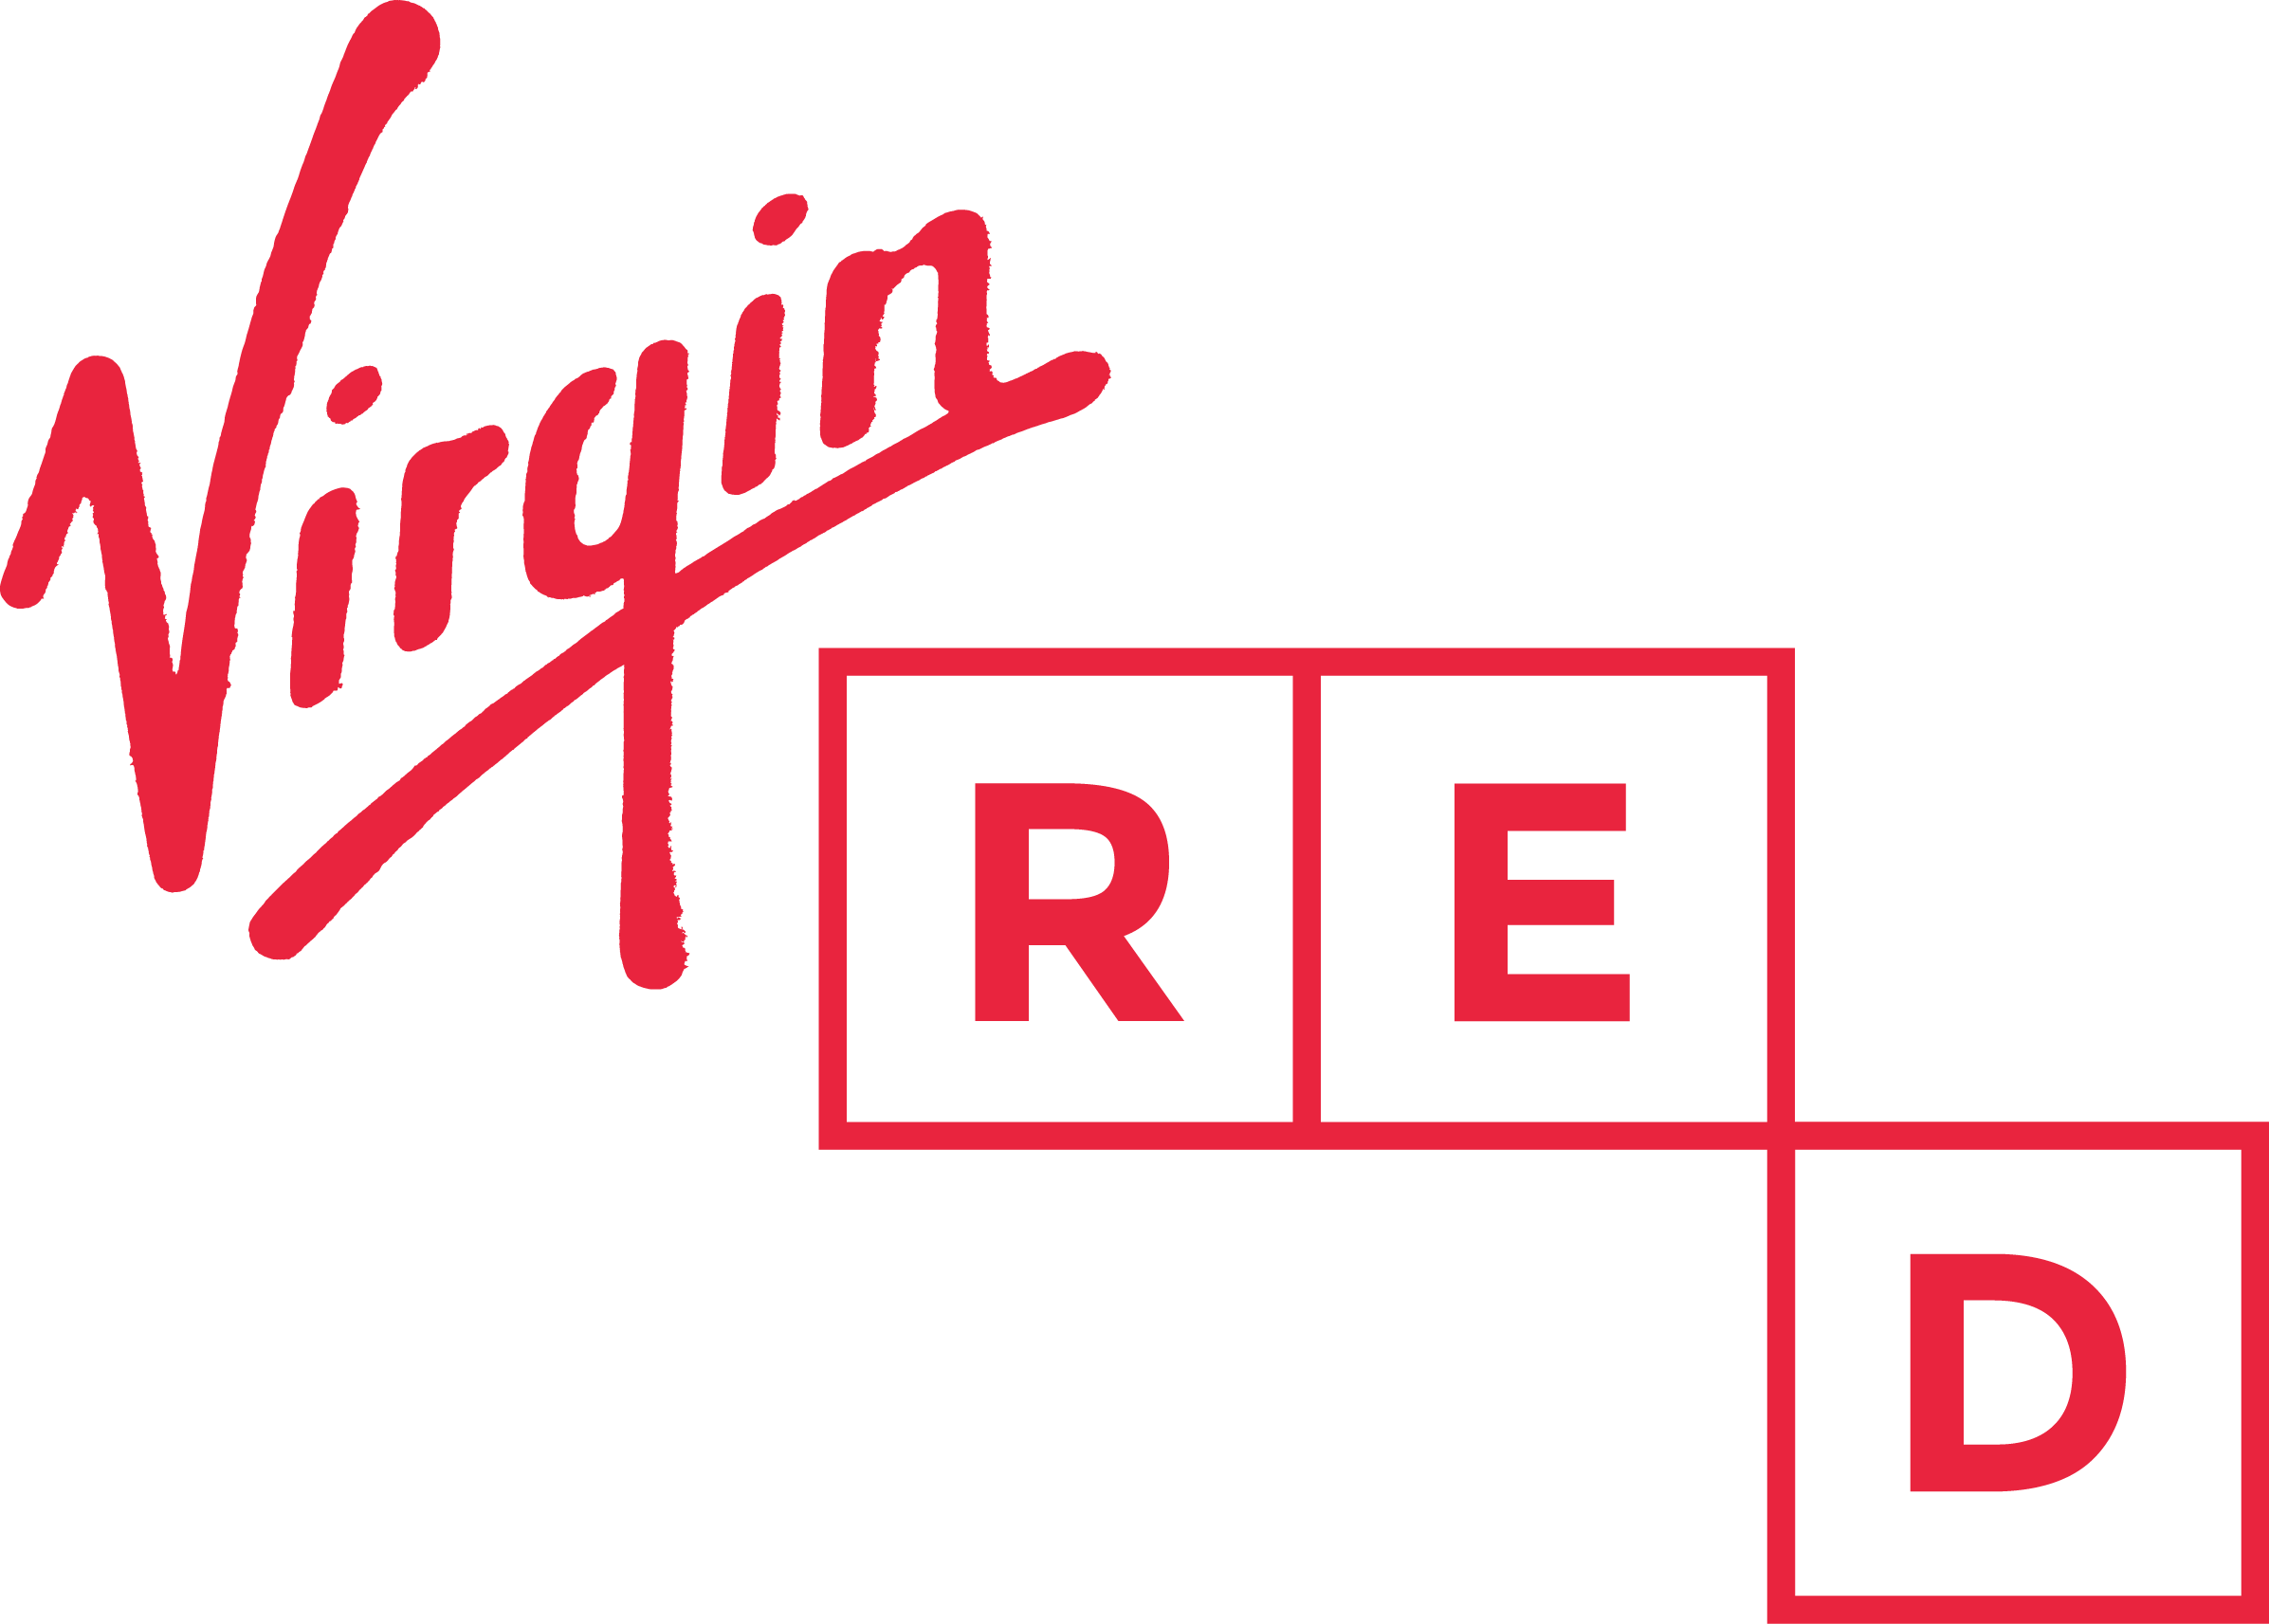 Red as Logo - Affinity promo codes | Virgin Holidays